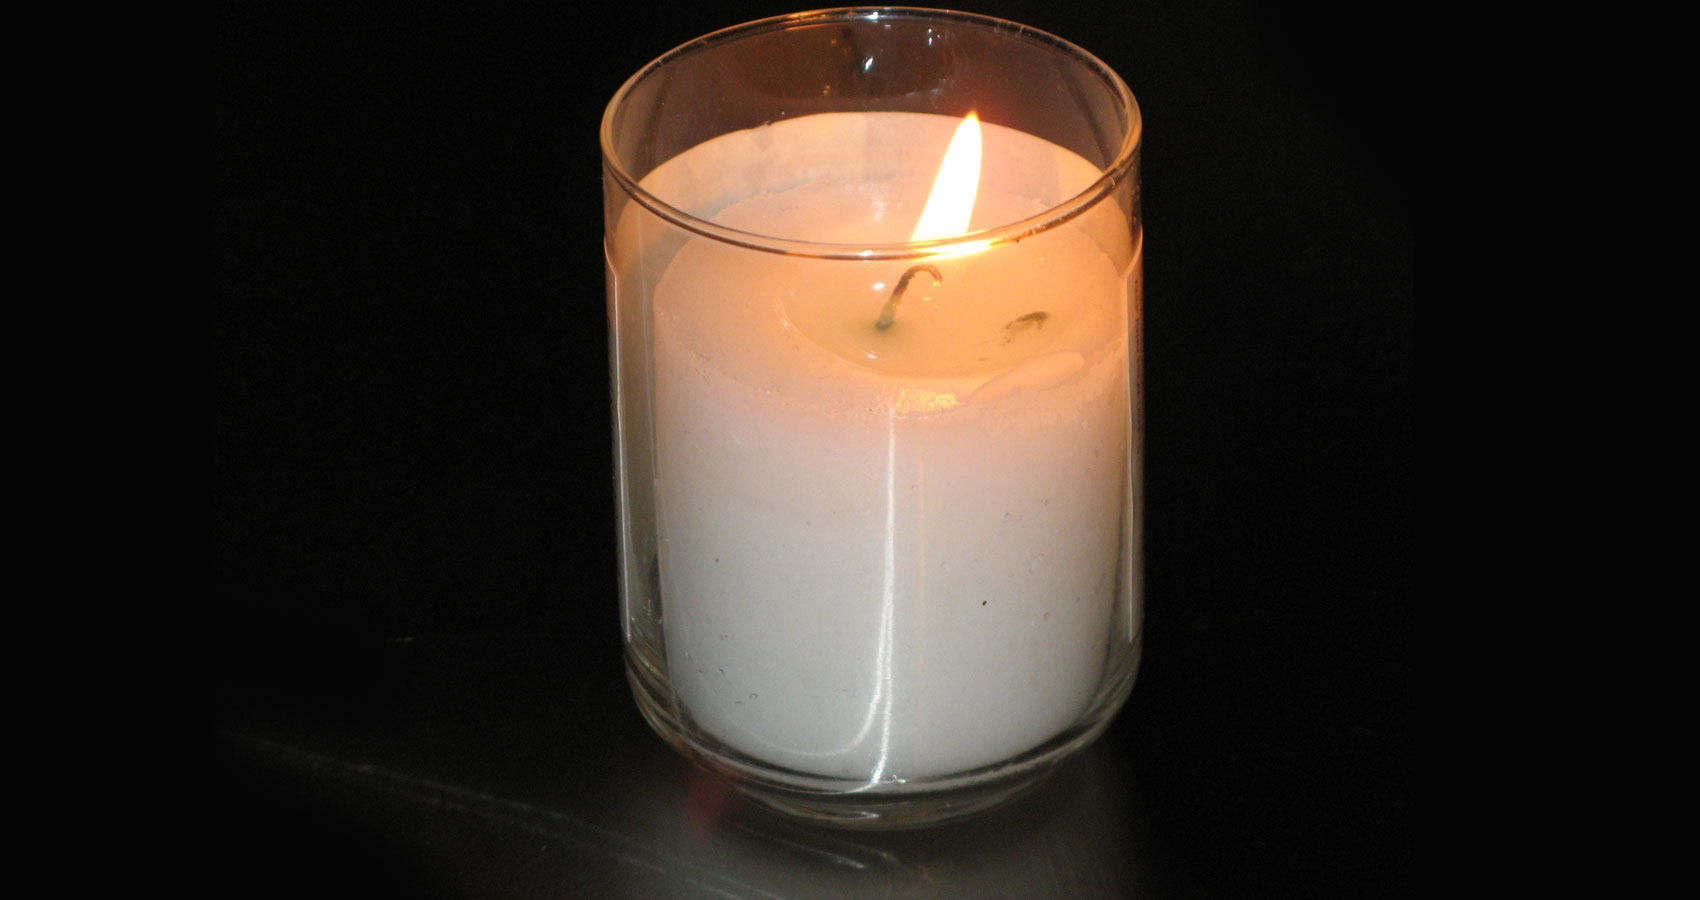 Watching Candles Burn, a poem written by Mark Tulin at Spillwords.com